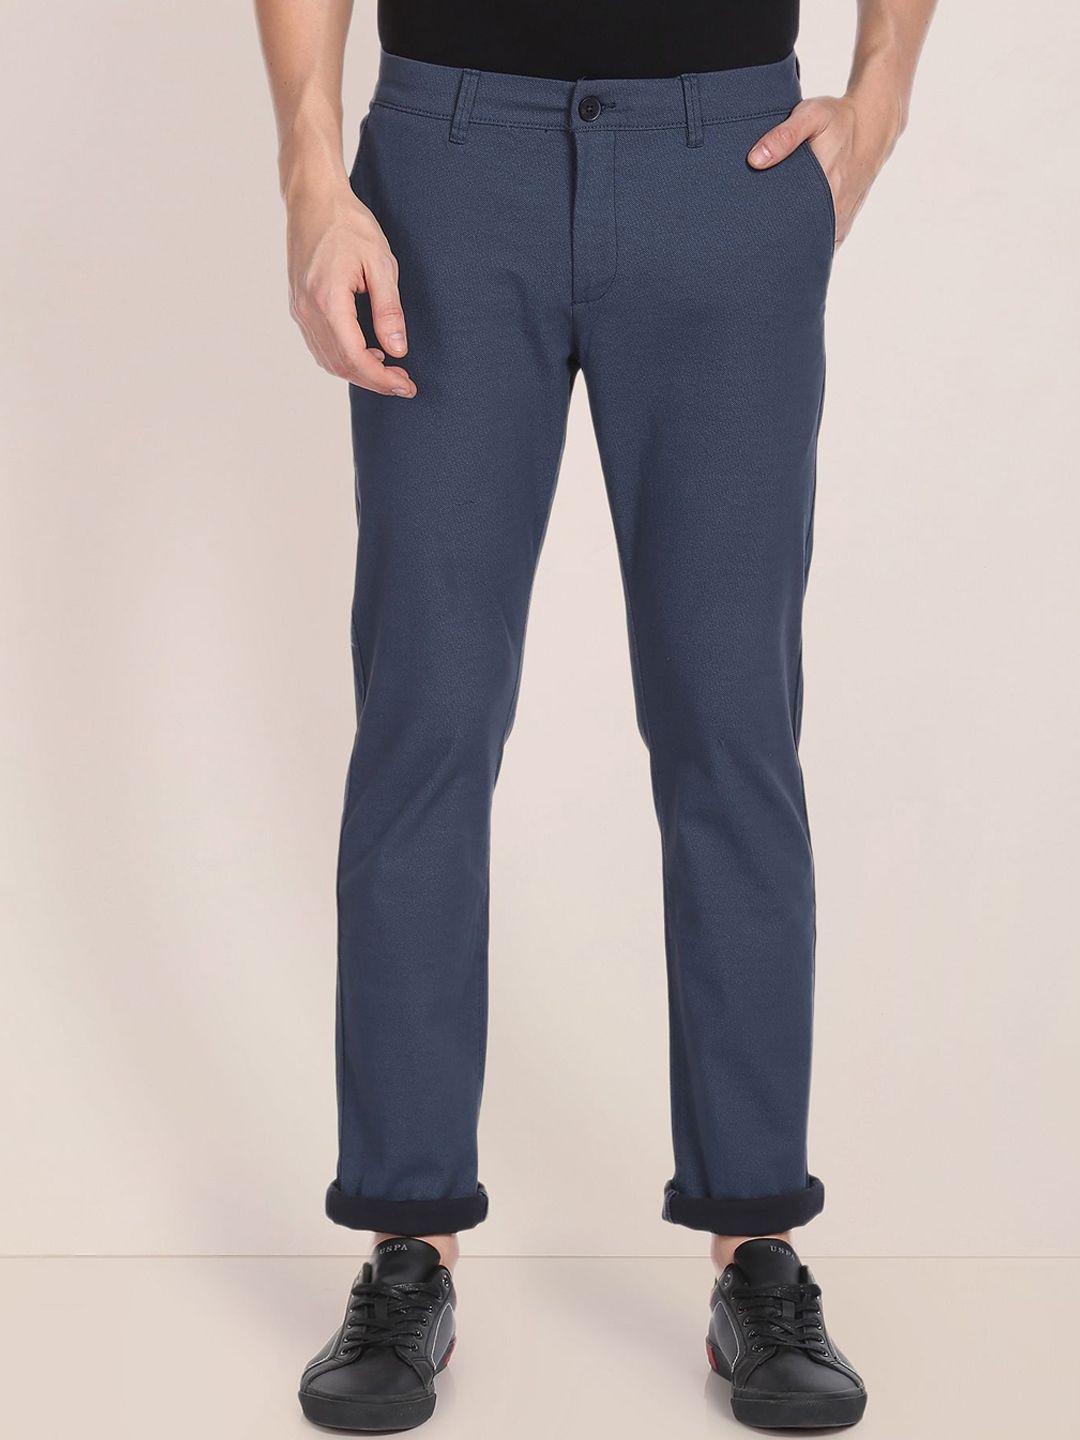 u.s. polo assn. men regular fit mid-rise chinos